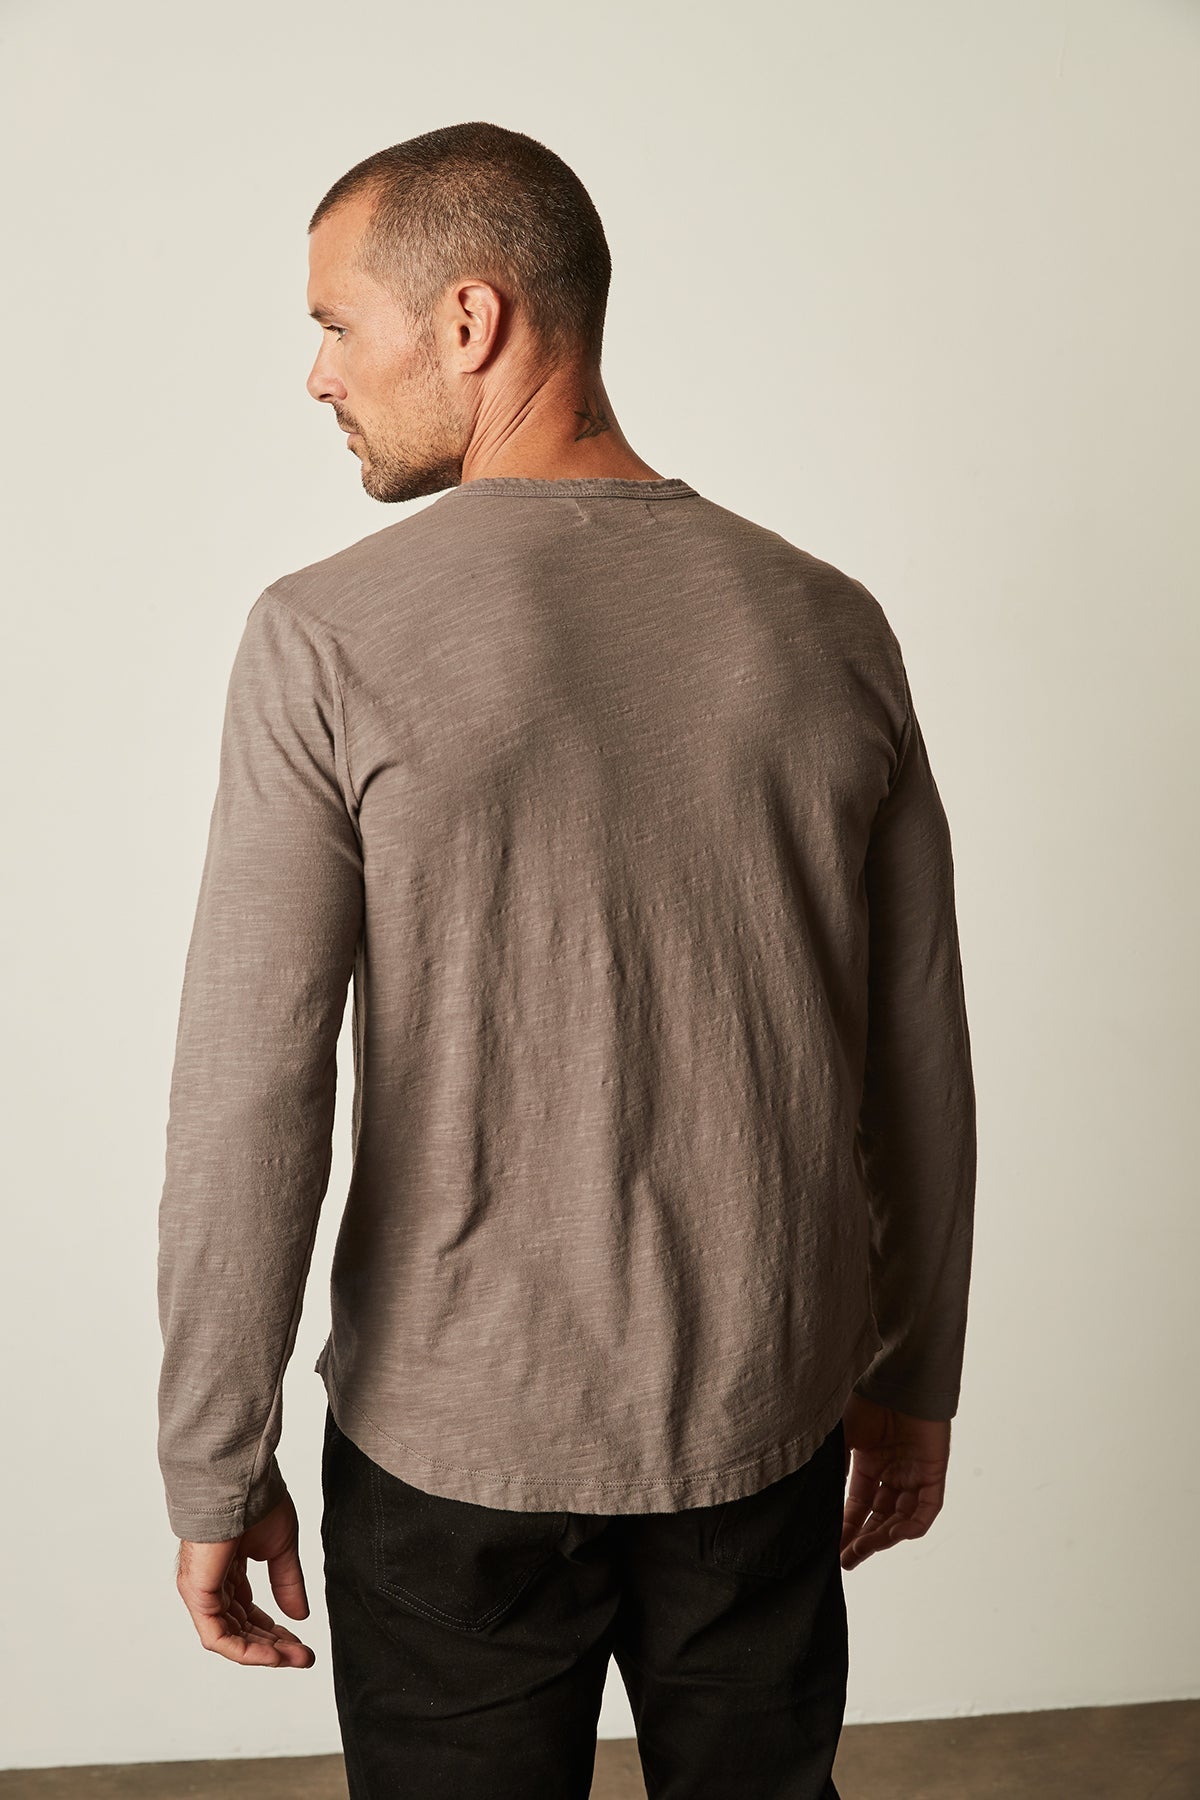   The back view of a man wearing a Velvet by Graham & Spencer KAI CREW NECK TEE, perfect as a layering piece. 